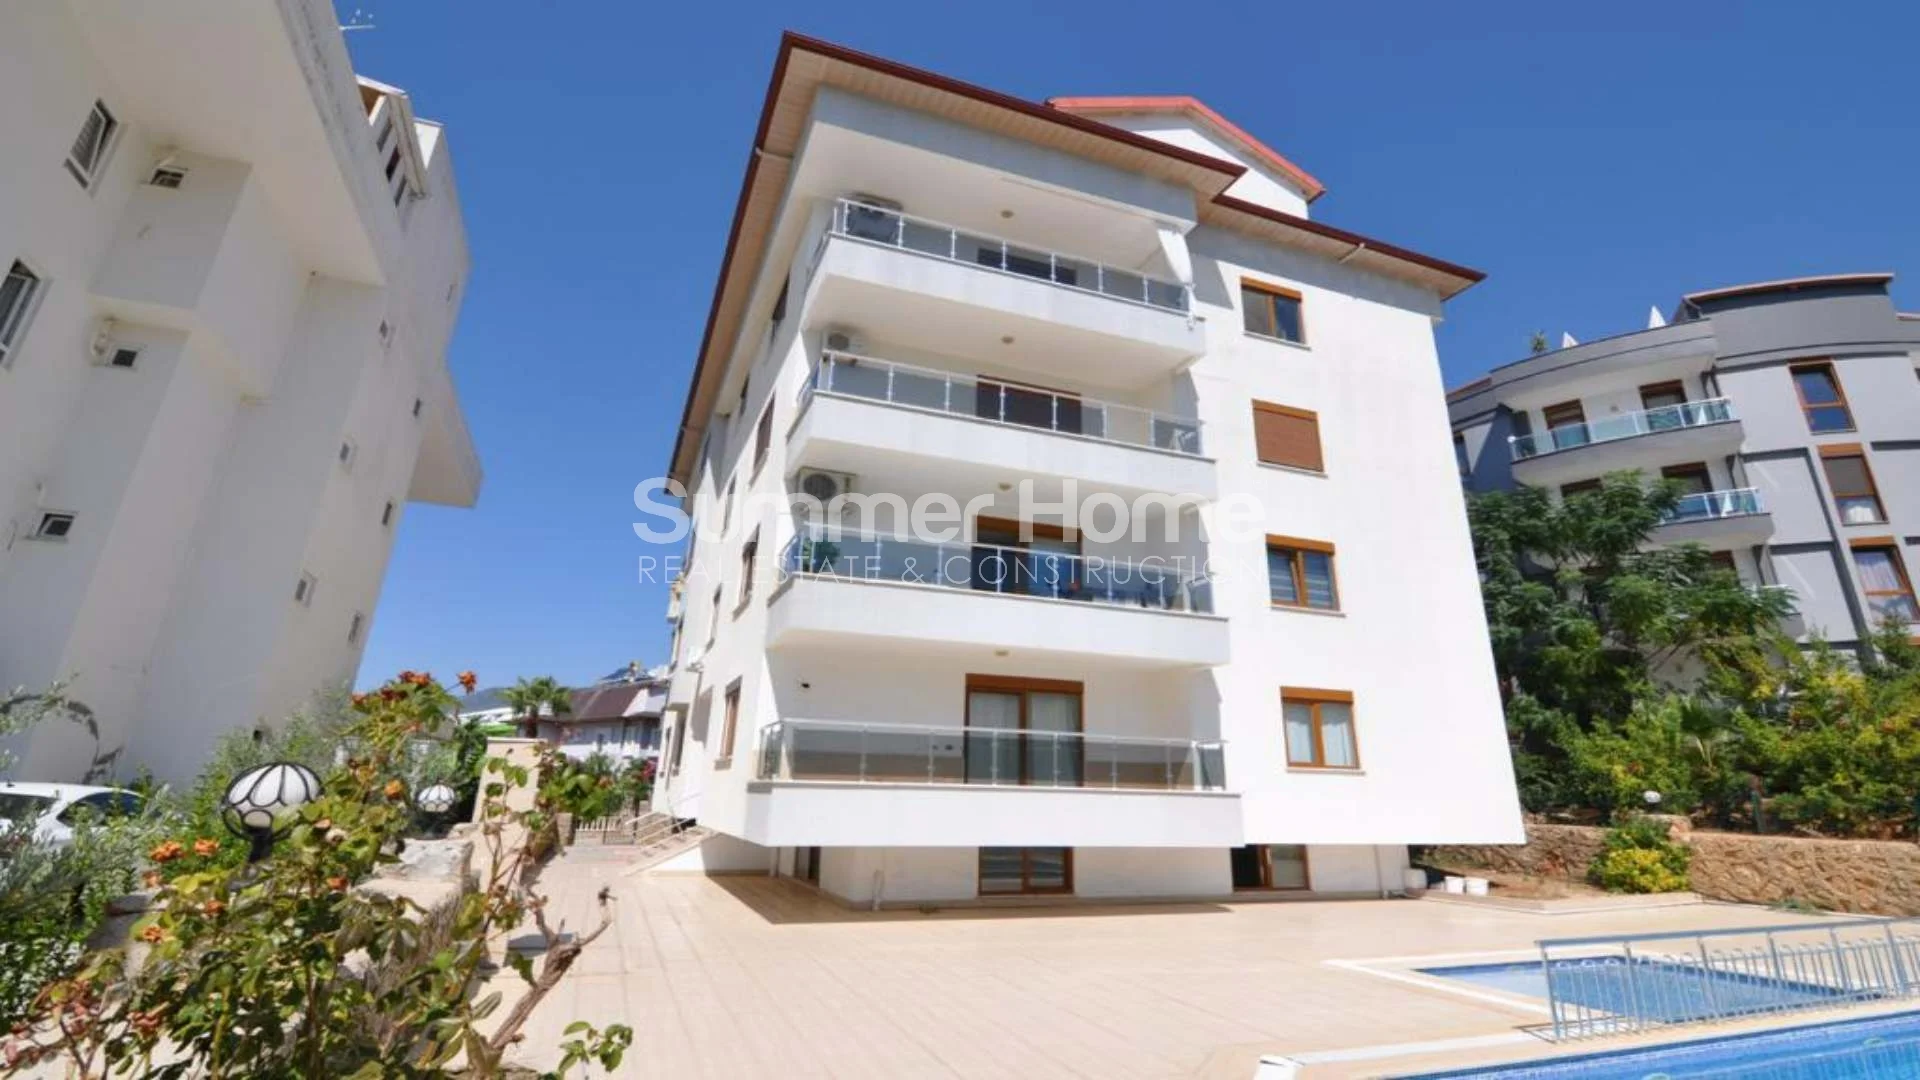 For sale Apartment Alanya Tosmur general - 5